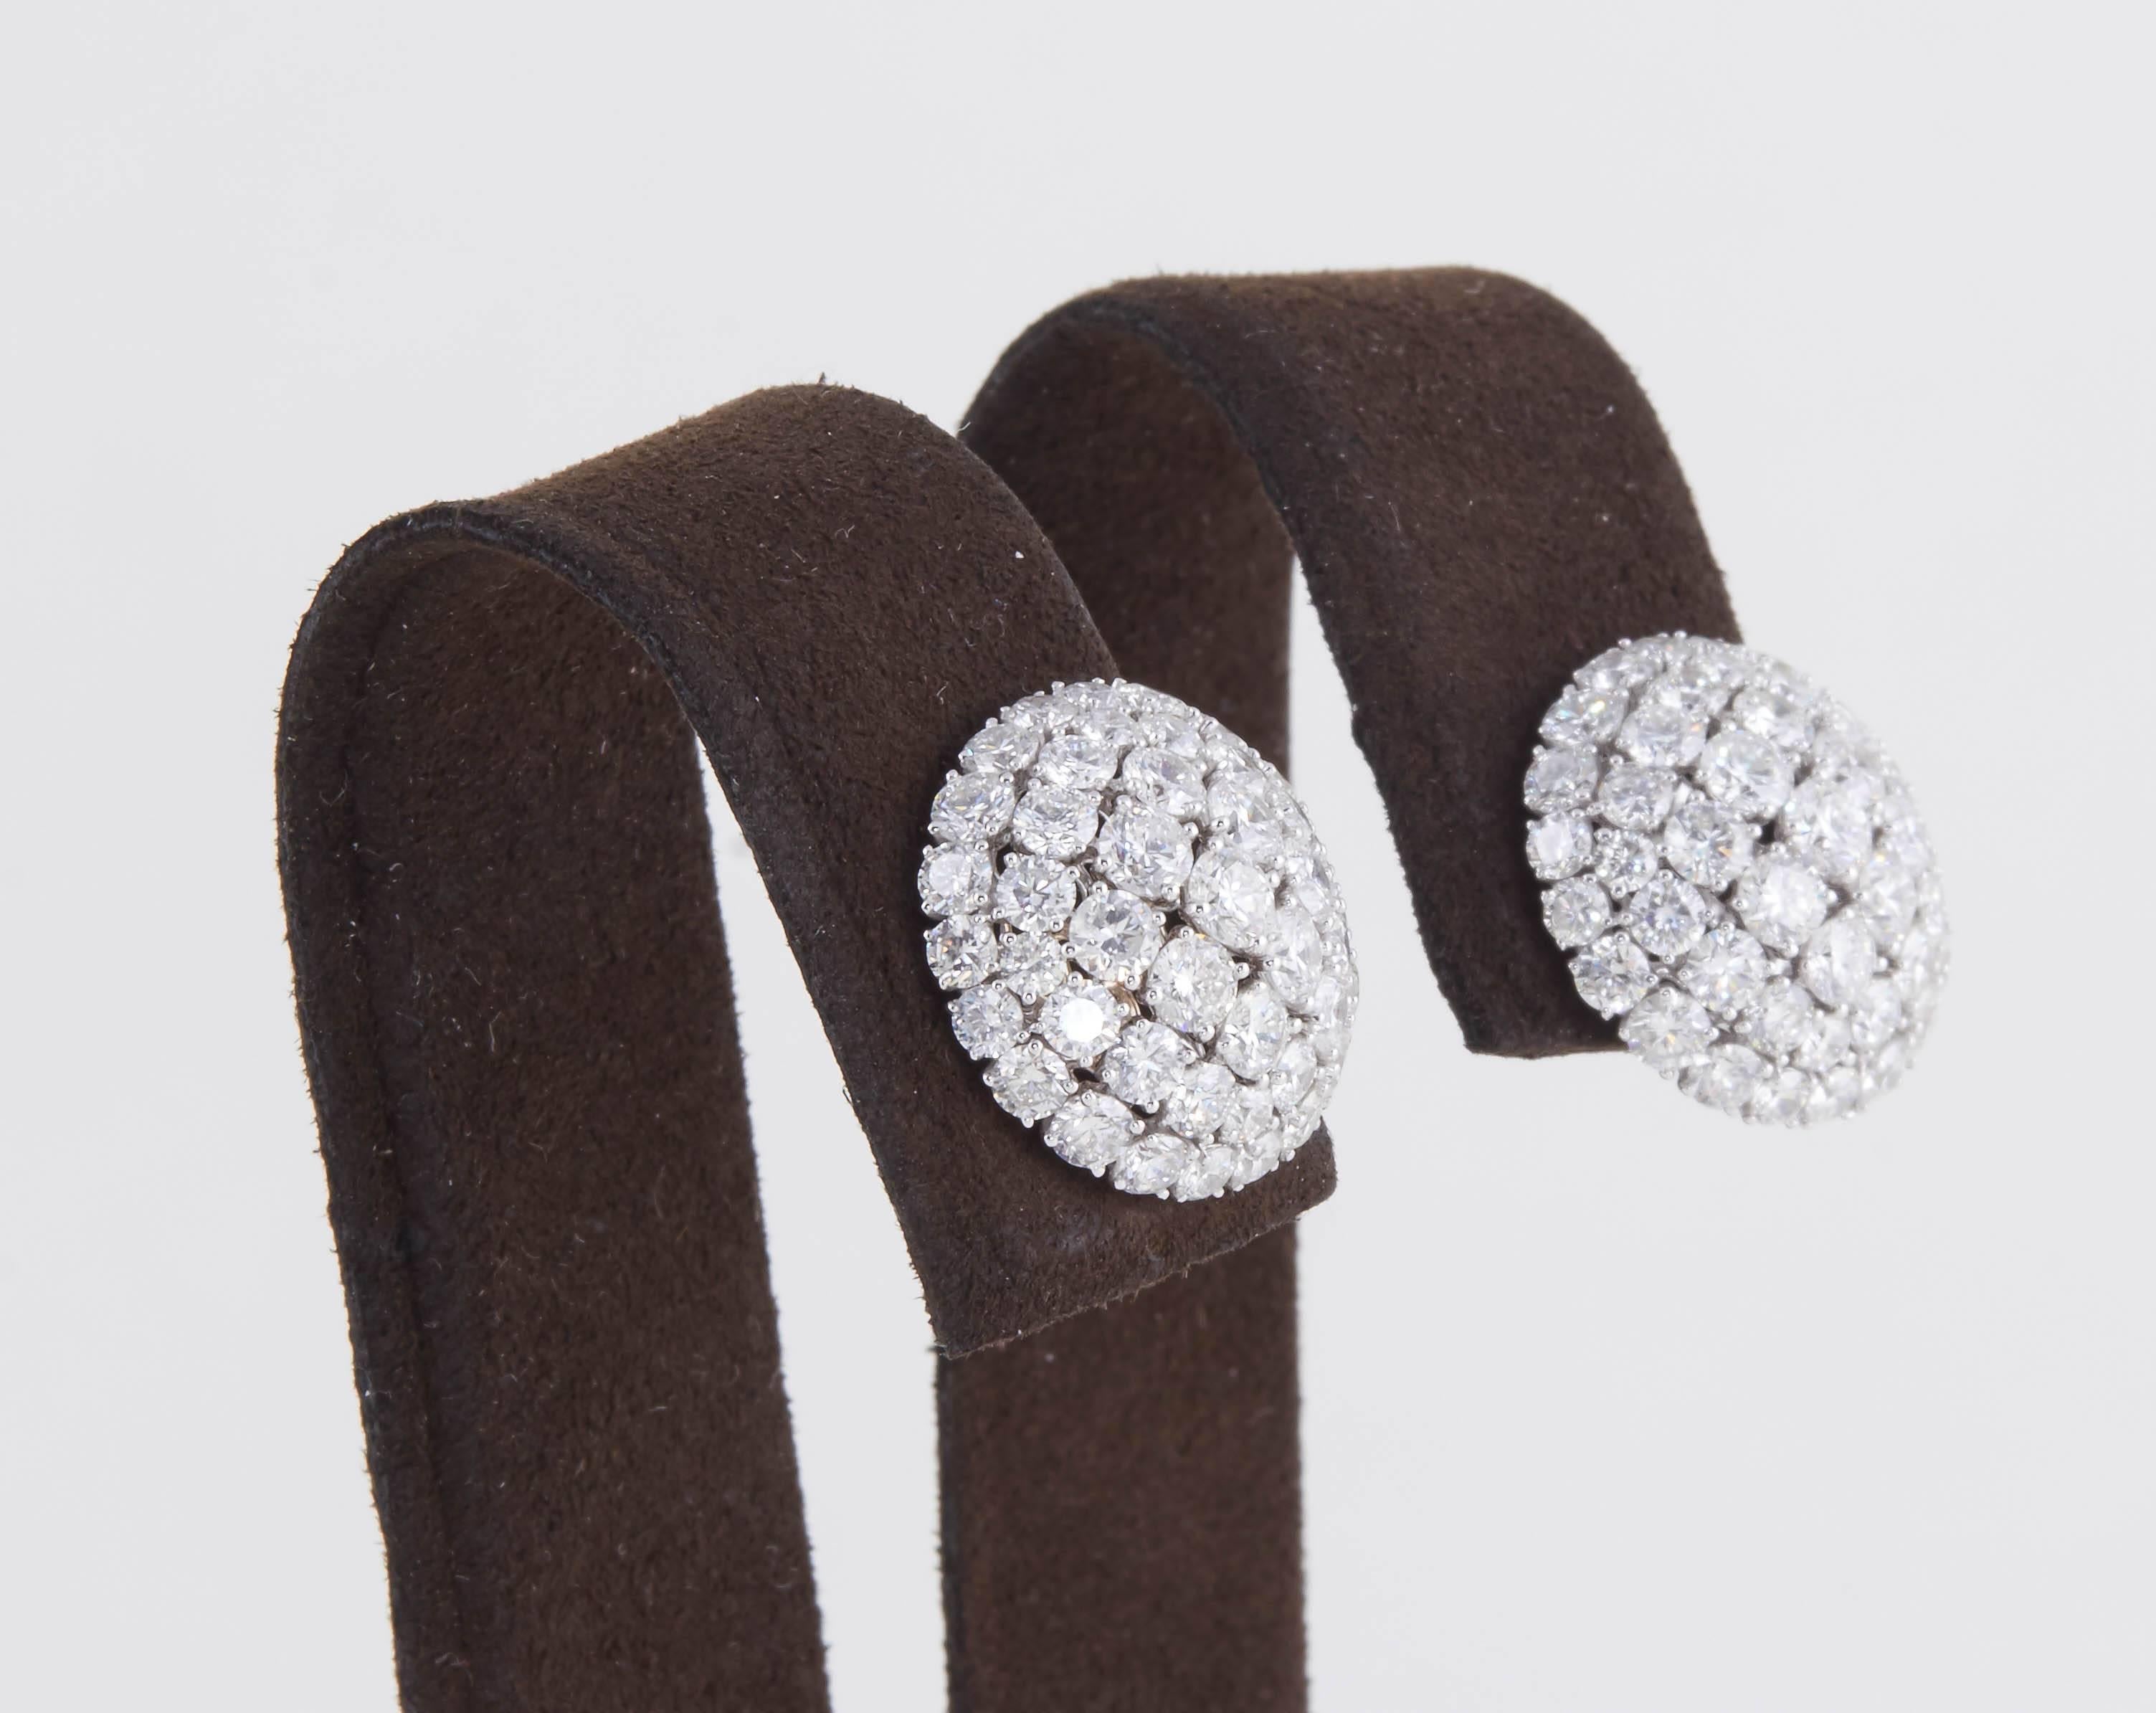 
A must have!

4.95 carats of round brilliant cut diamonds, F/G color set in 18k white gold.

These earrings were constructed to maximize brilliance in a slight dome design. 

Approximately .62 inches in diameter. 

The perfect gift, made in New